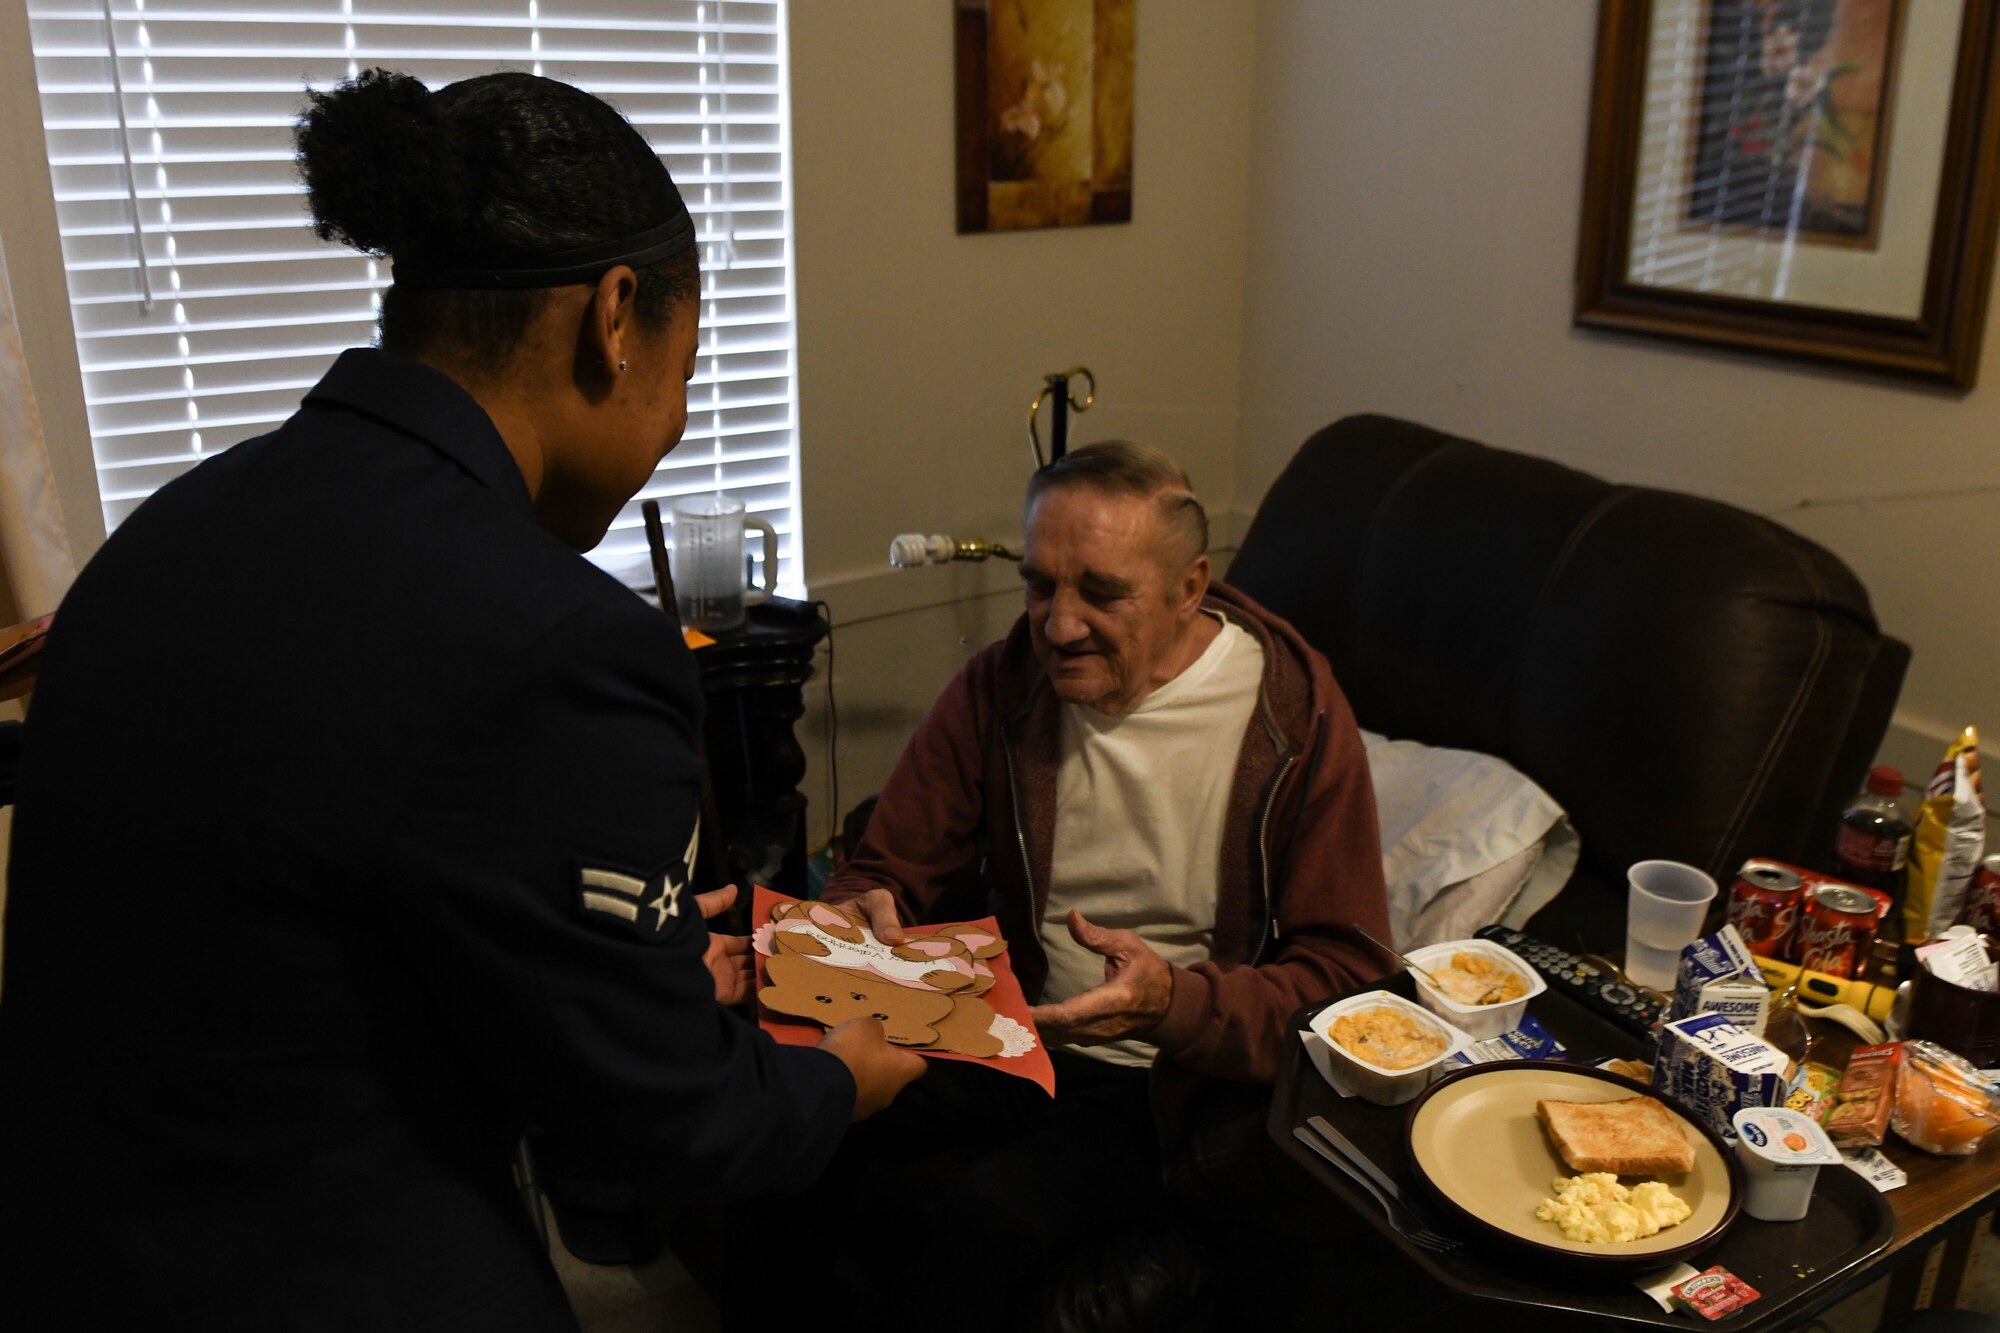 Airman 1st Class Hope Curry, material management specialist assigned to the 97th Logistics Readiness Squadron, hands Valentine’s Day cards to a veteran